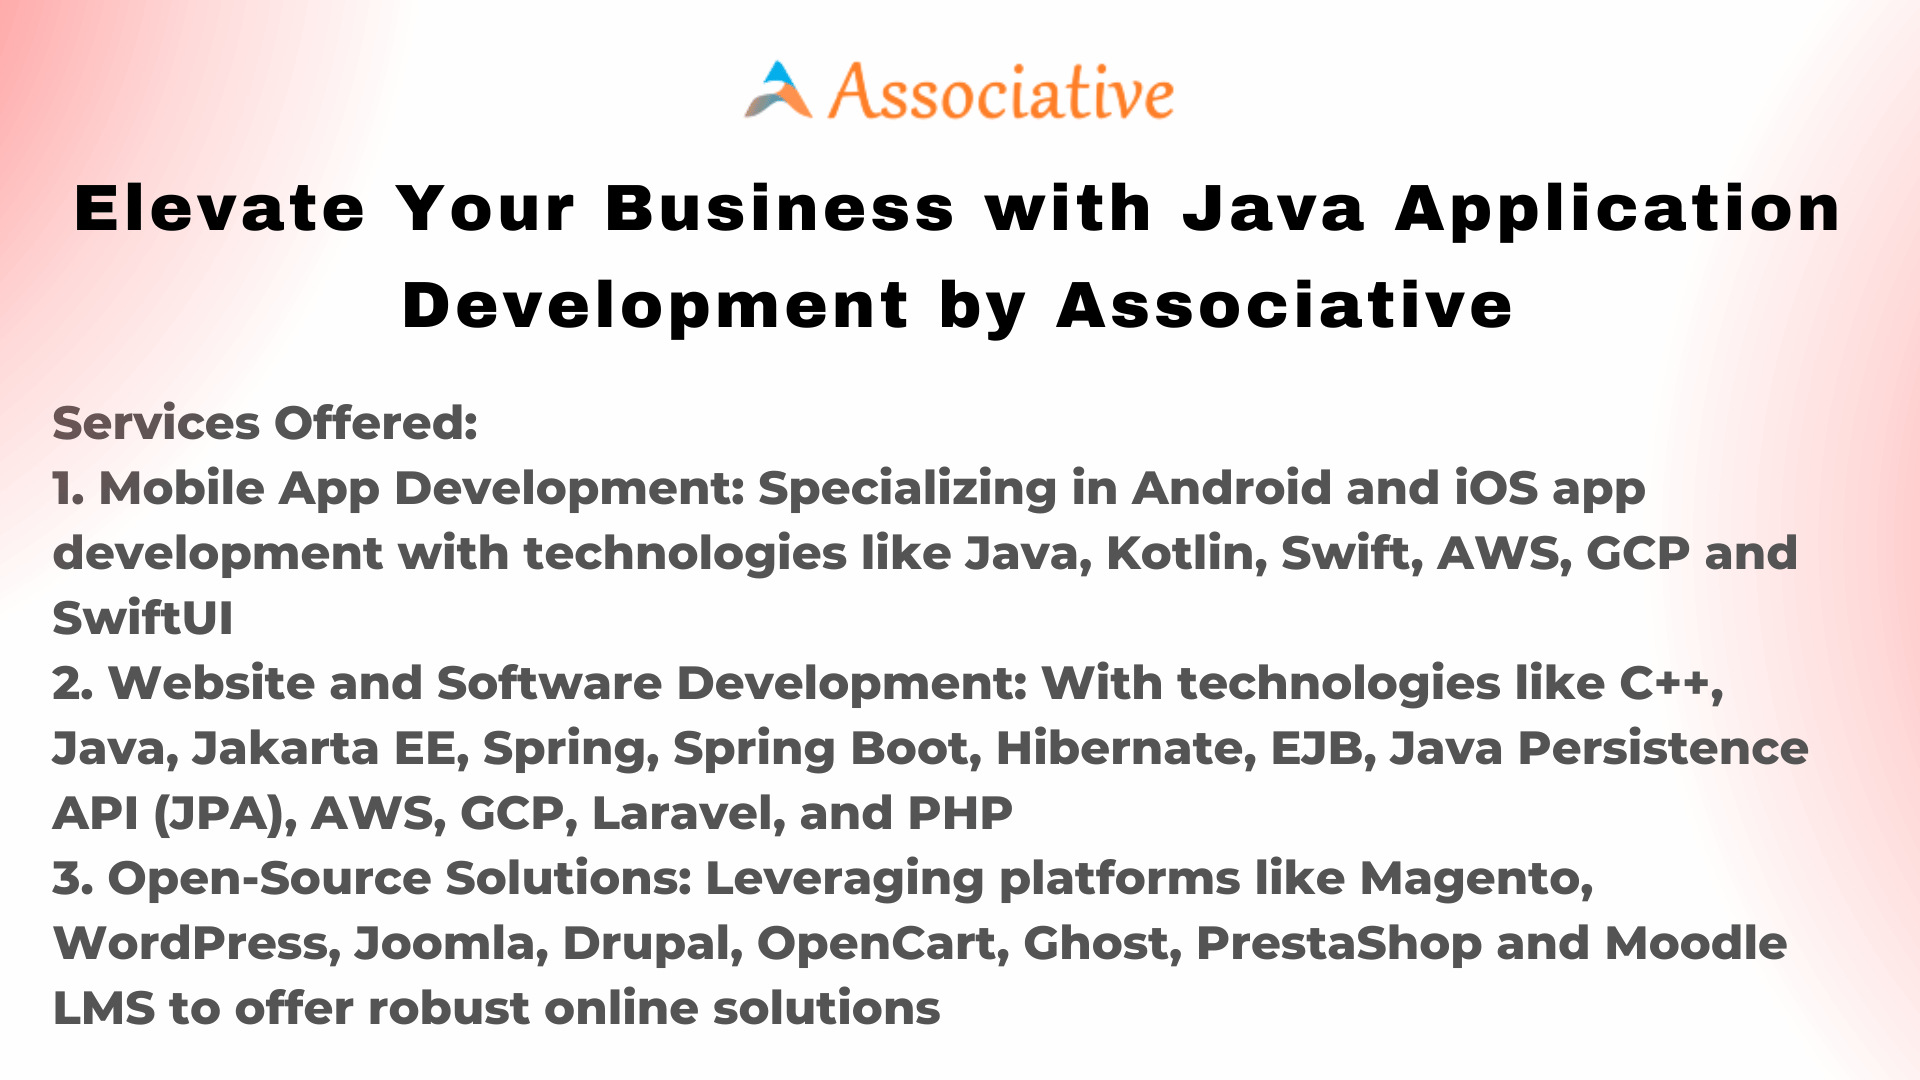 Elevate Your Business with Java Application Development by Associative